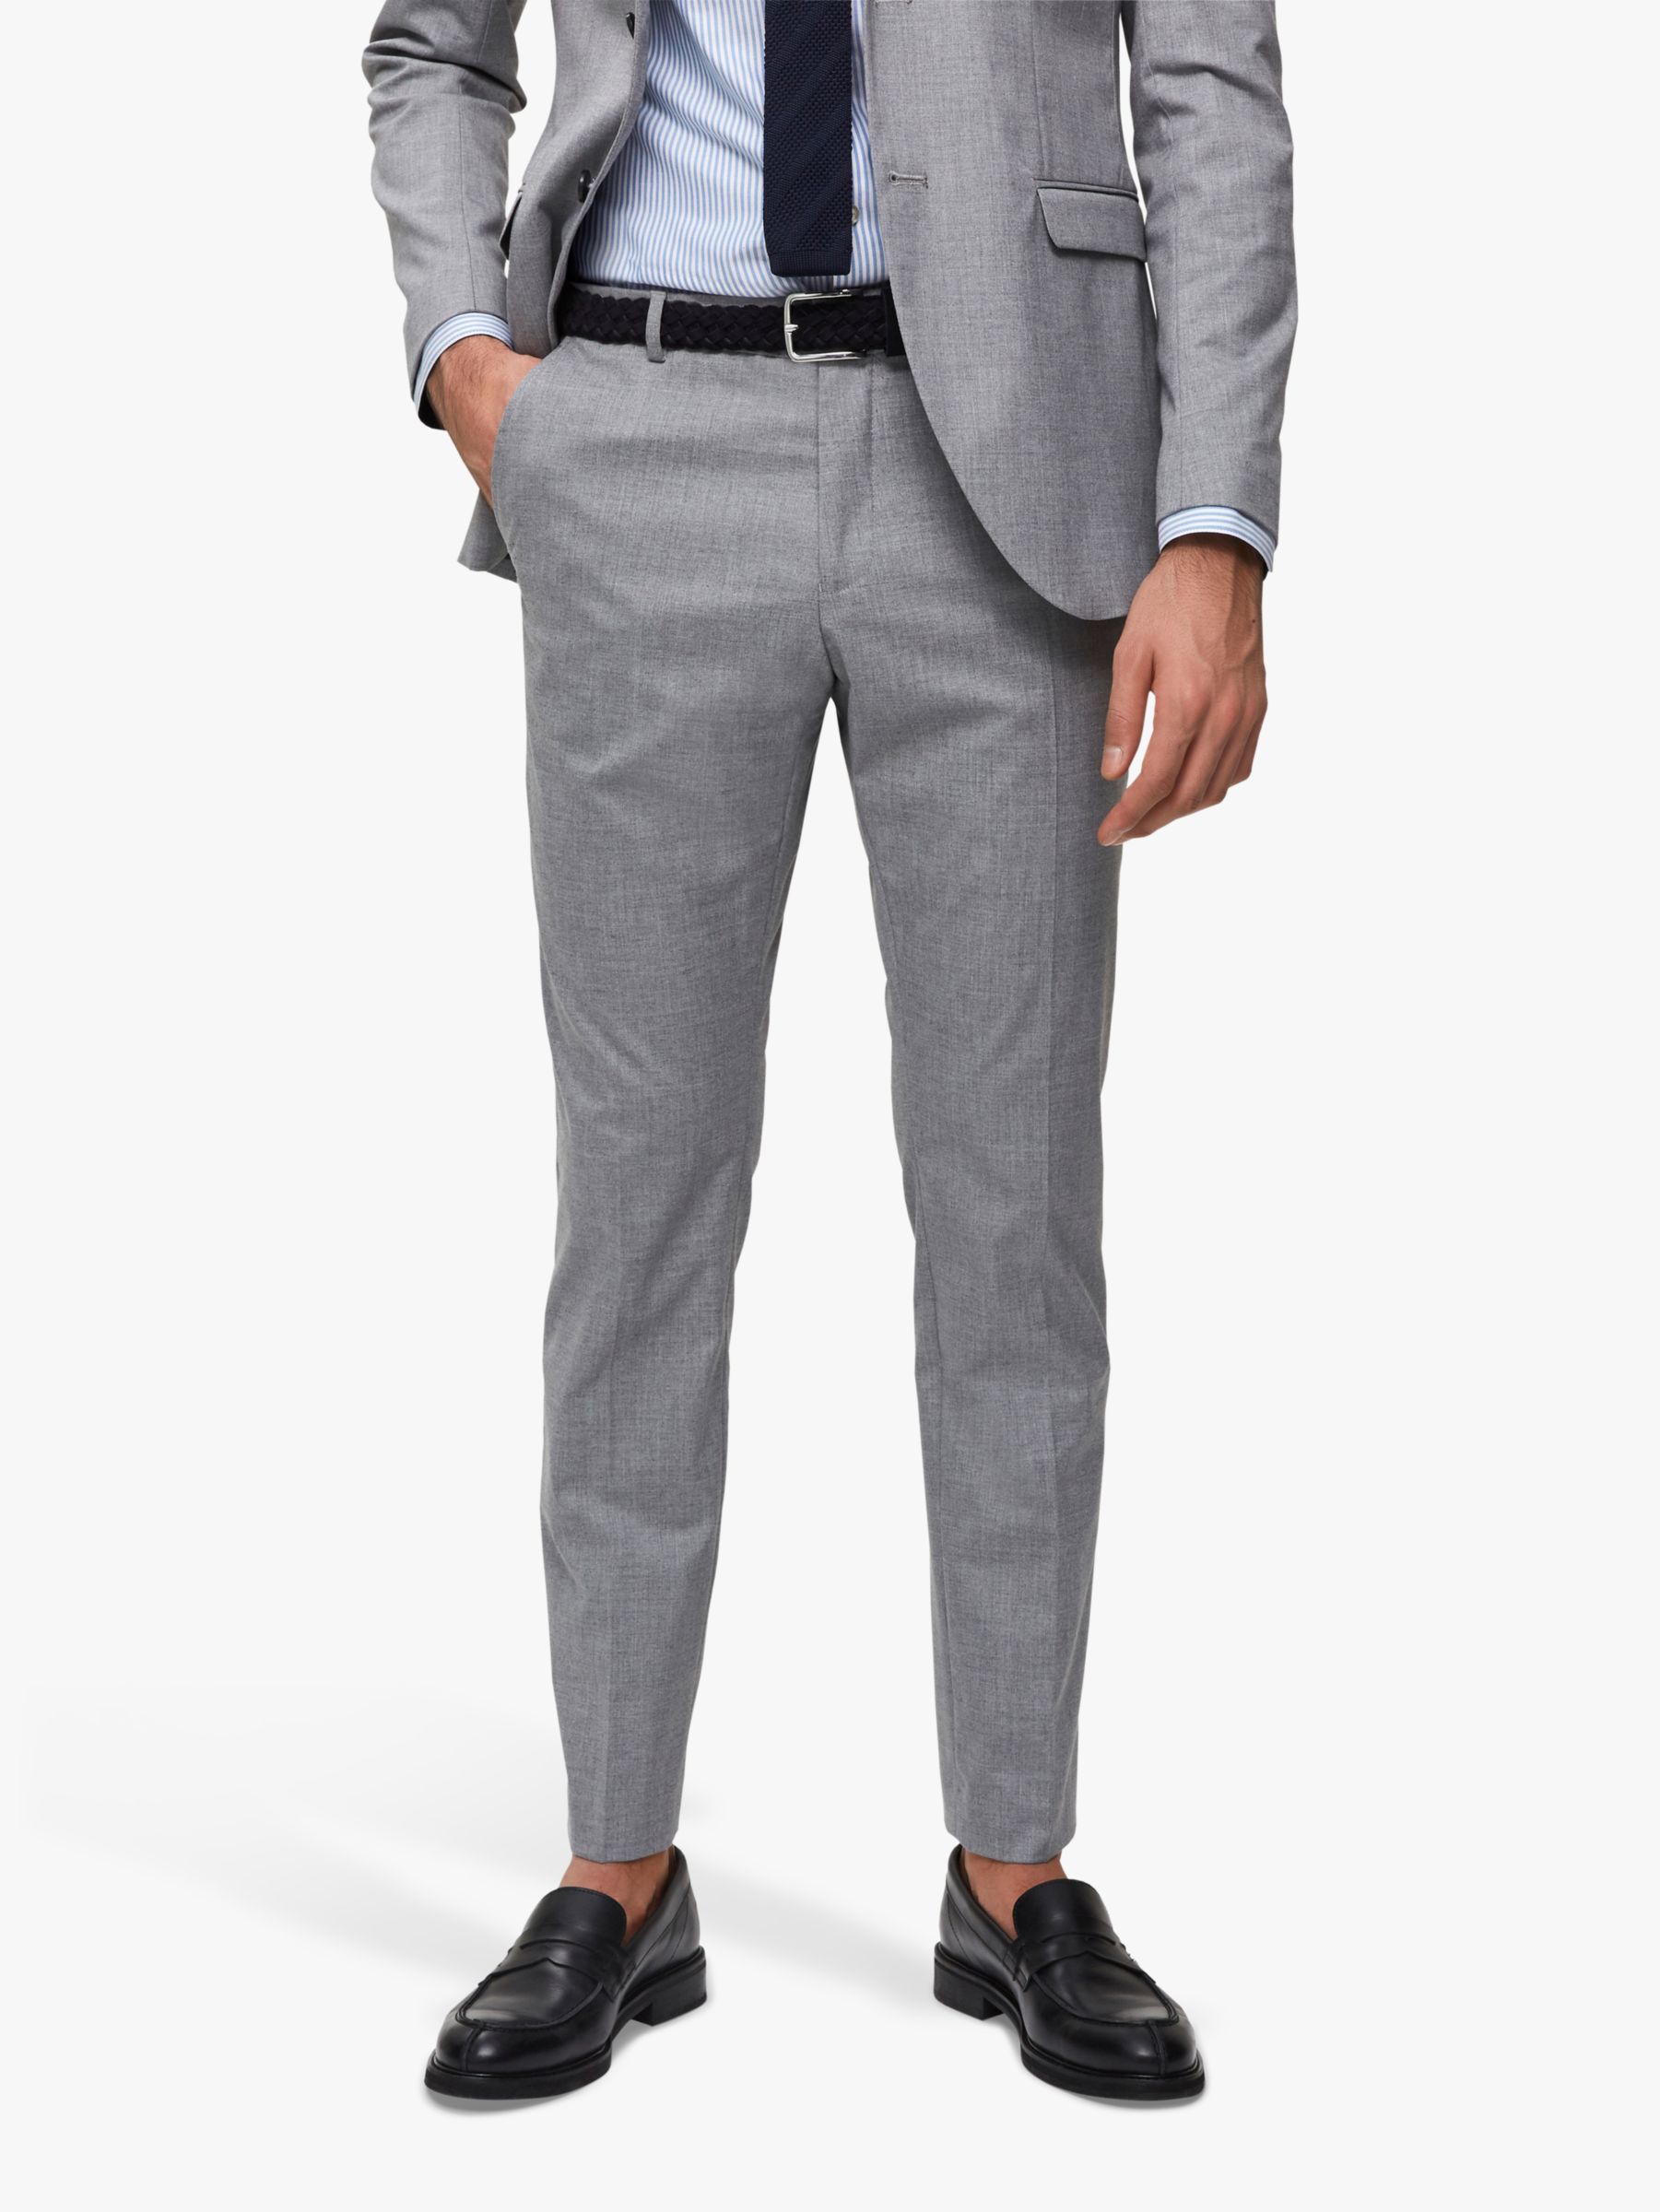 Buy SELECTED HOMME Slim Fit Suit Trousers Online at johnlewis.com